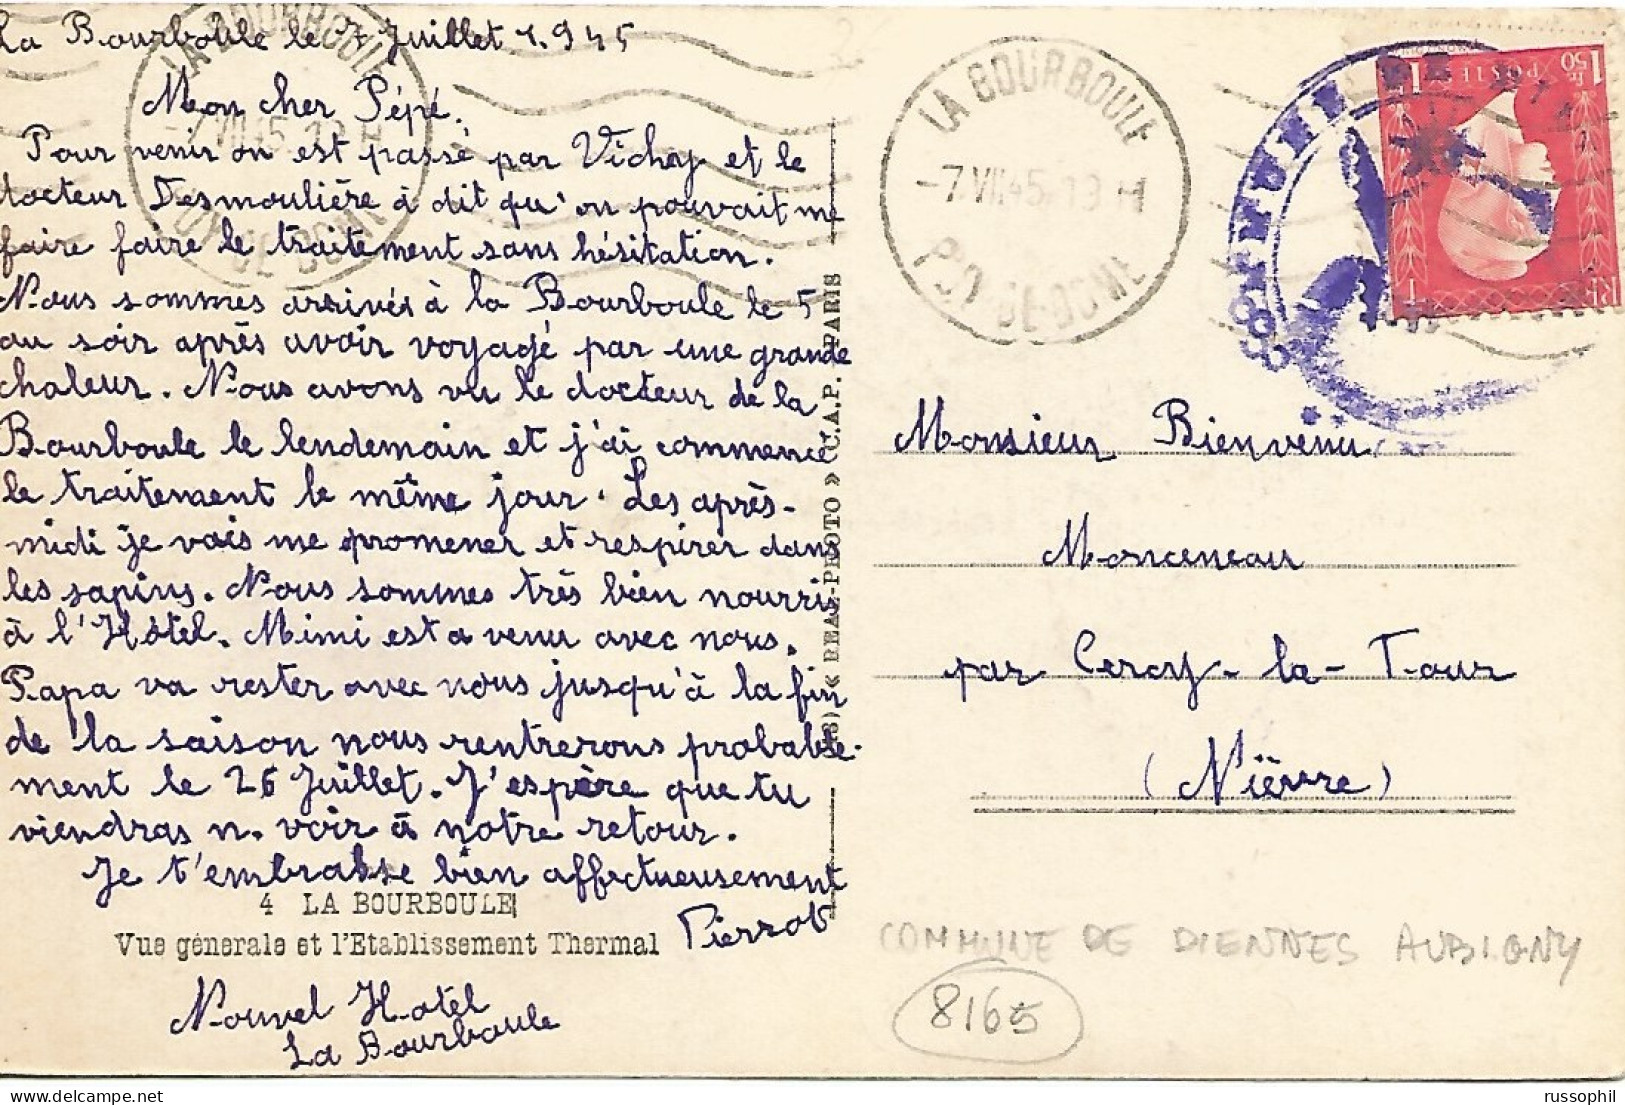 FRANCE - VARIETY &  CURIOSITY - Yv. #691 ALONE ON PC - STAMP OF THE TOWN HALL OF DIENNES (58) AS ARRIVAL MARK - 1945  - Briefe U. Dokumente